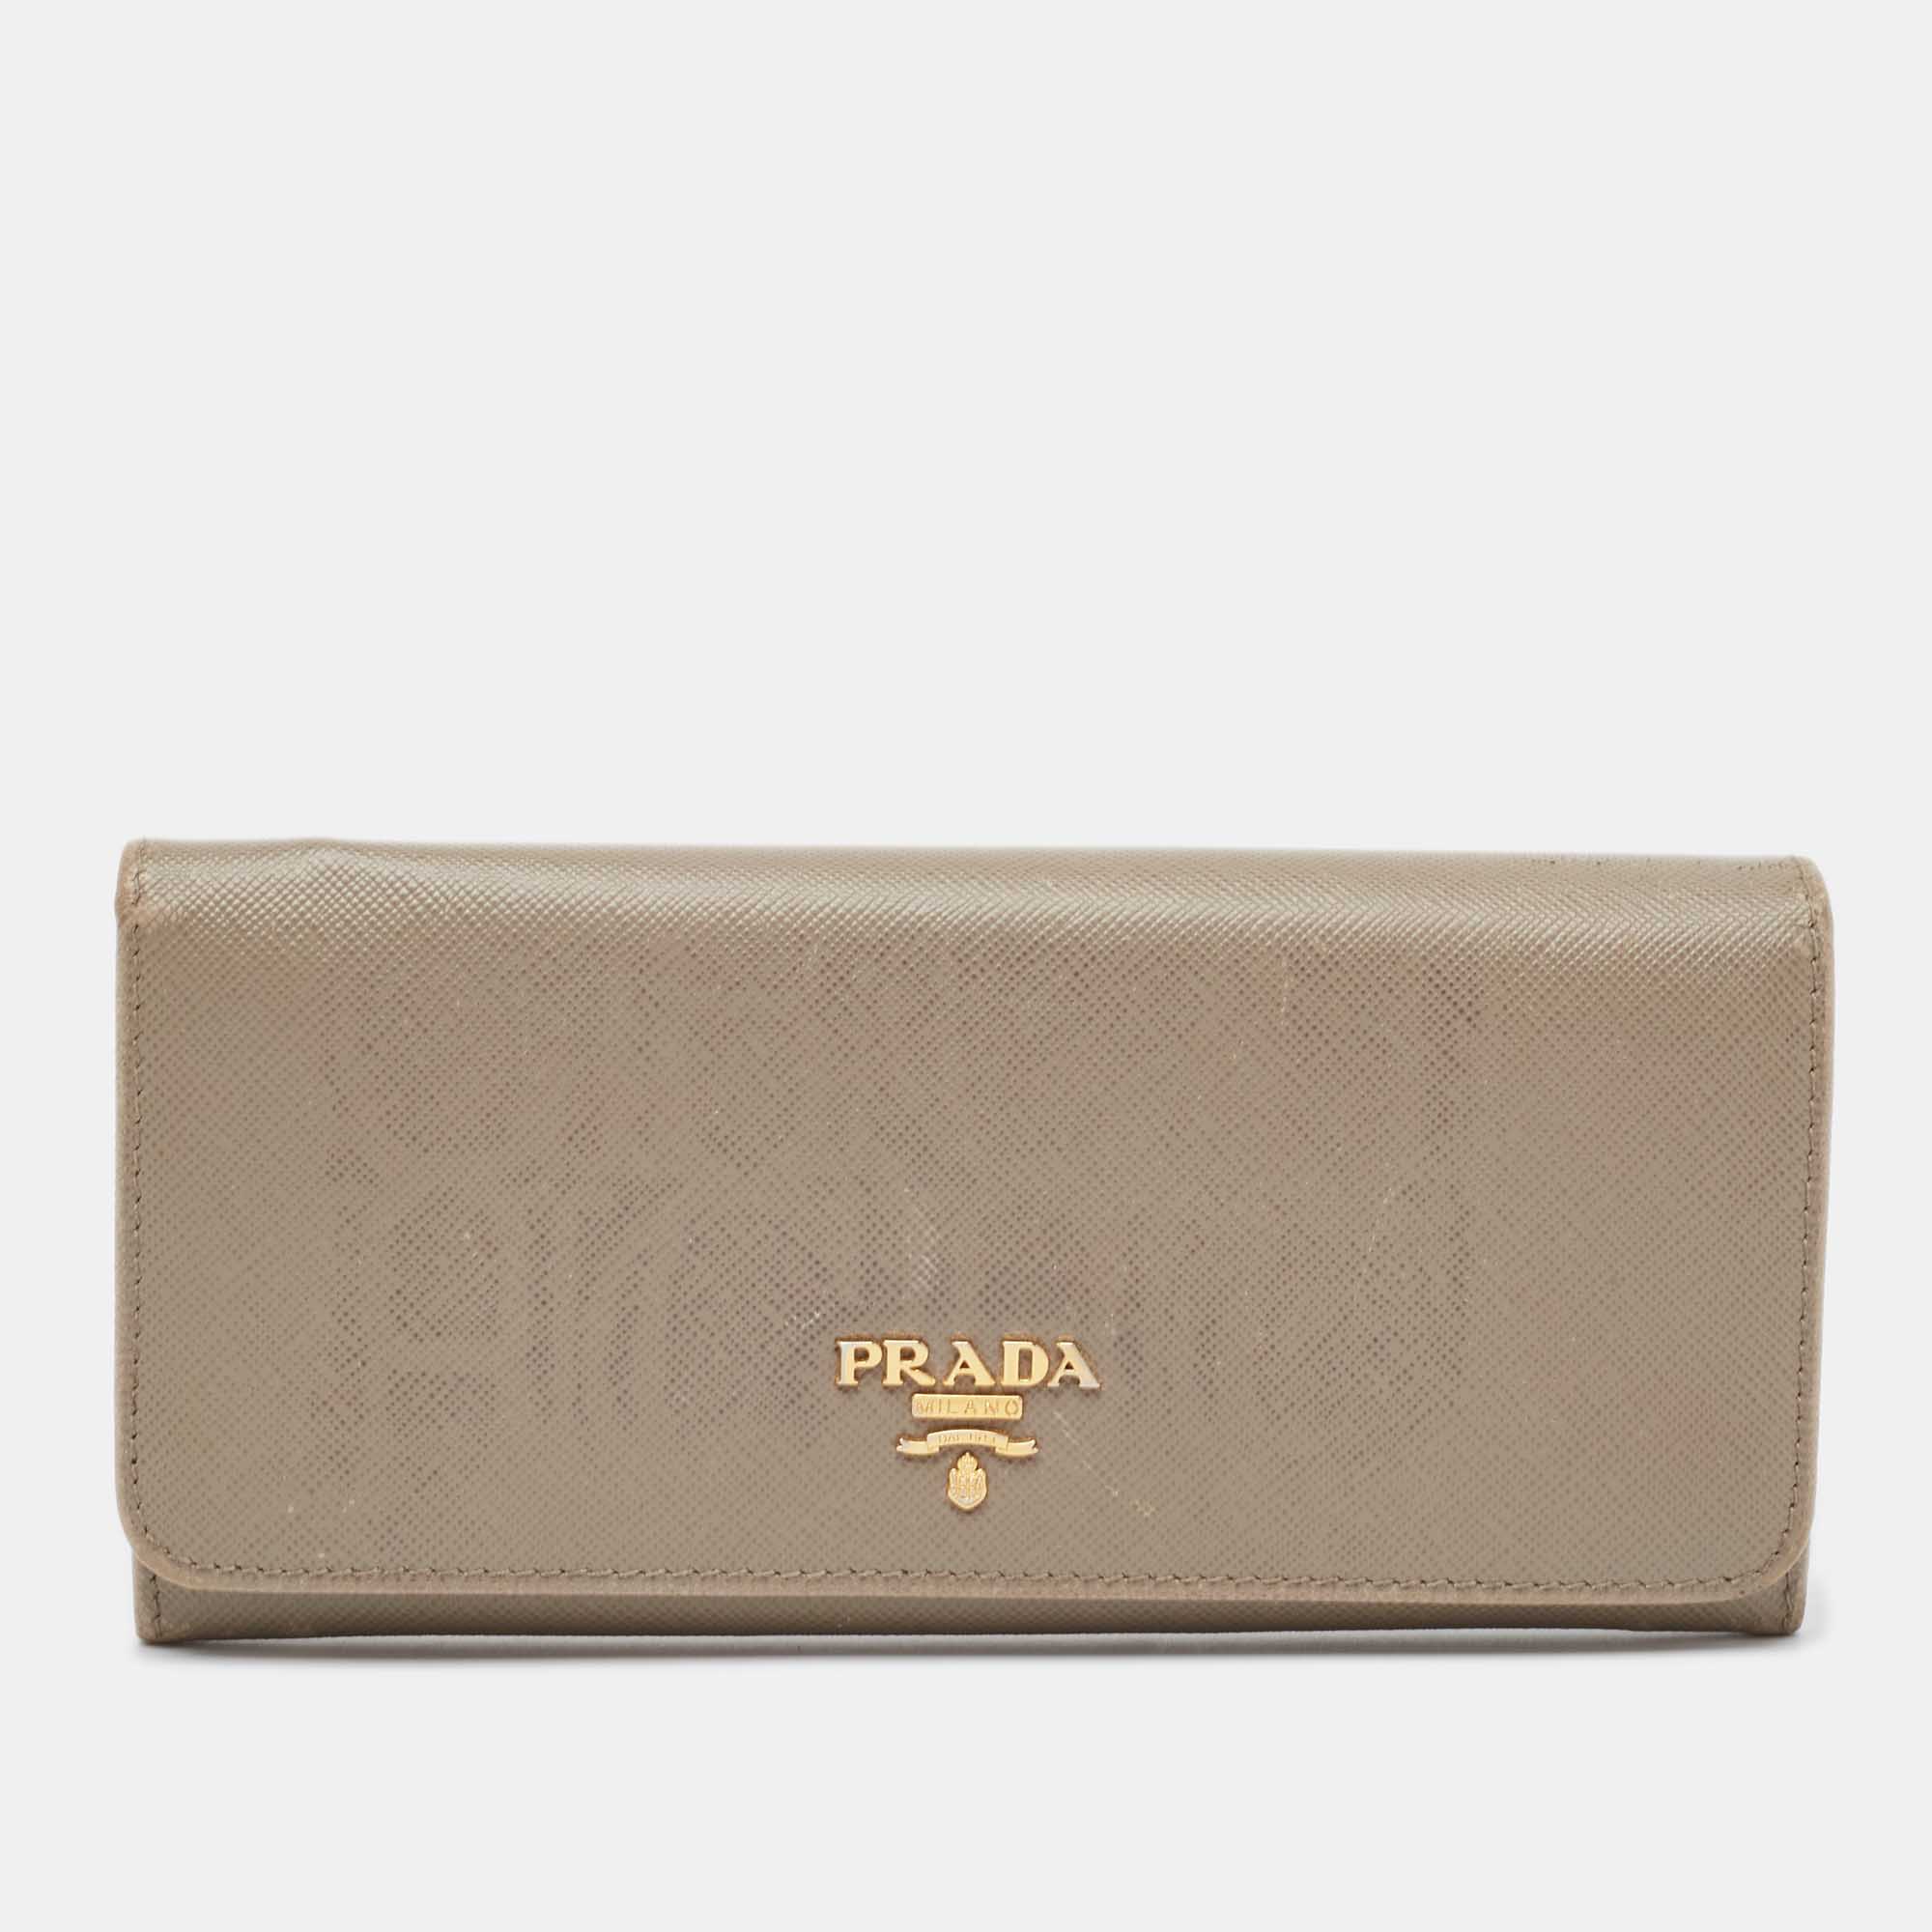 Pre-owned Prada Grey Saffiano Leather Flap Continental Wallet